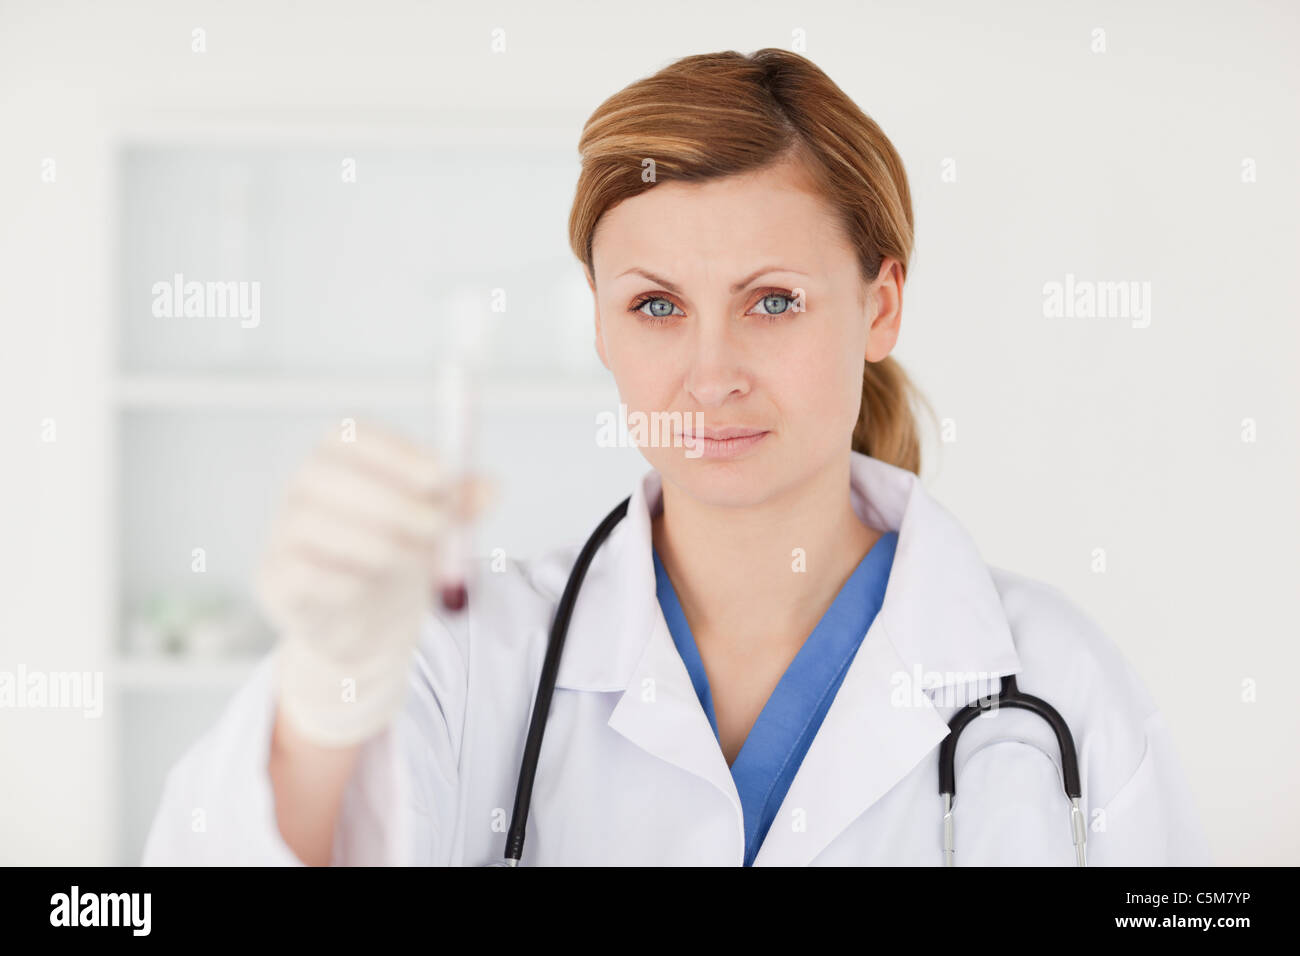 Blond-haired scientist looking at the camera Stock Photo